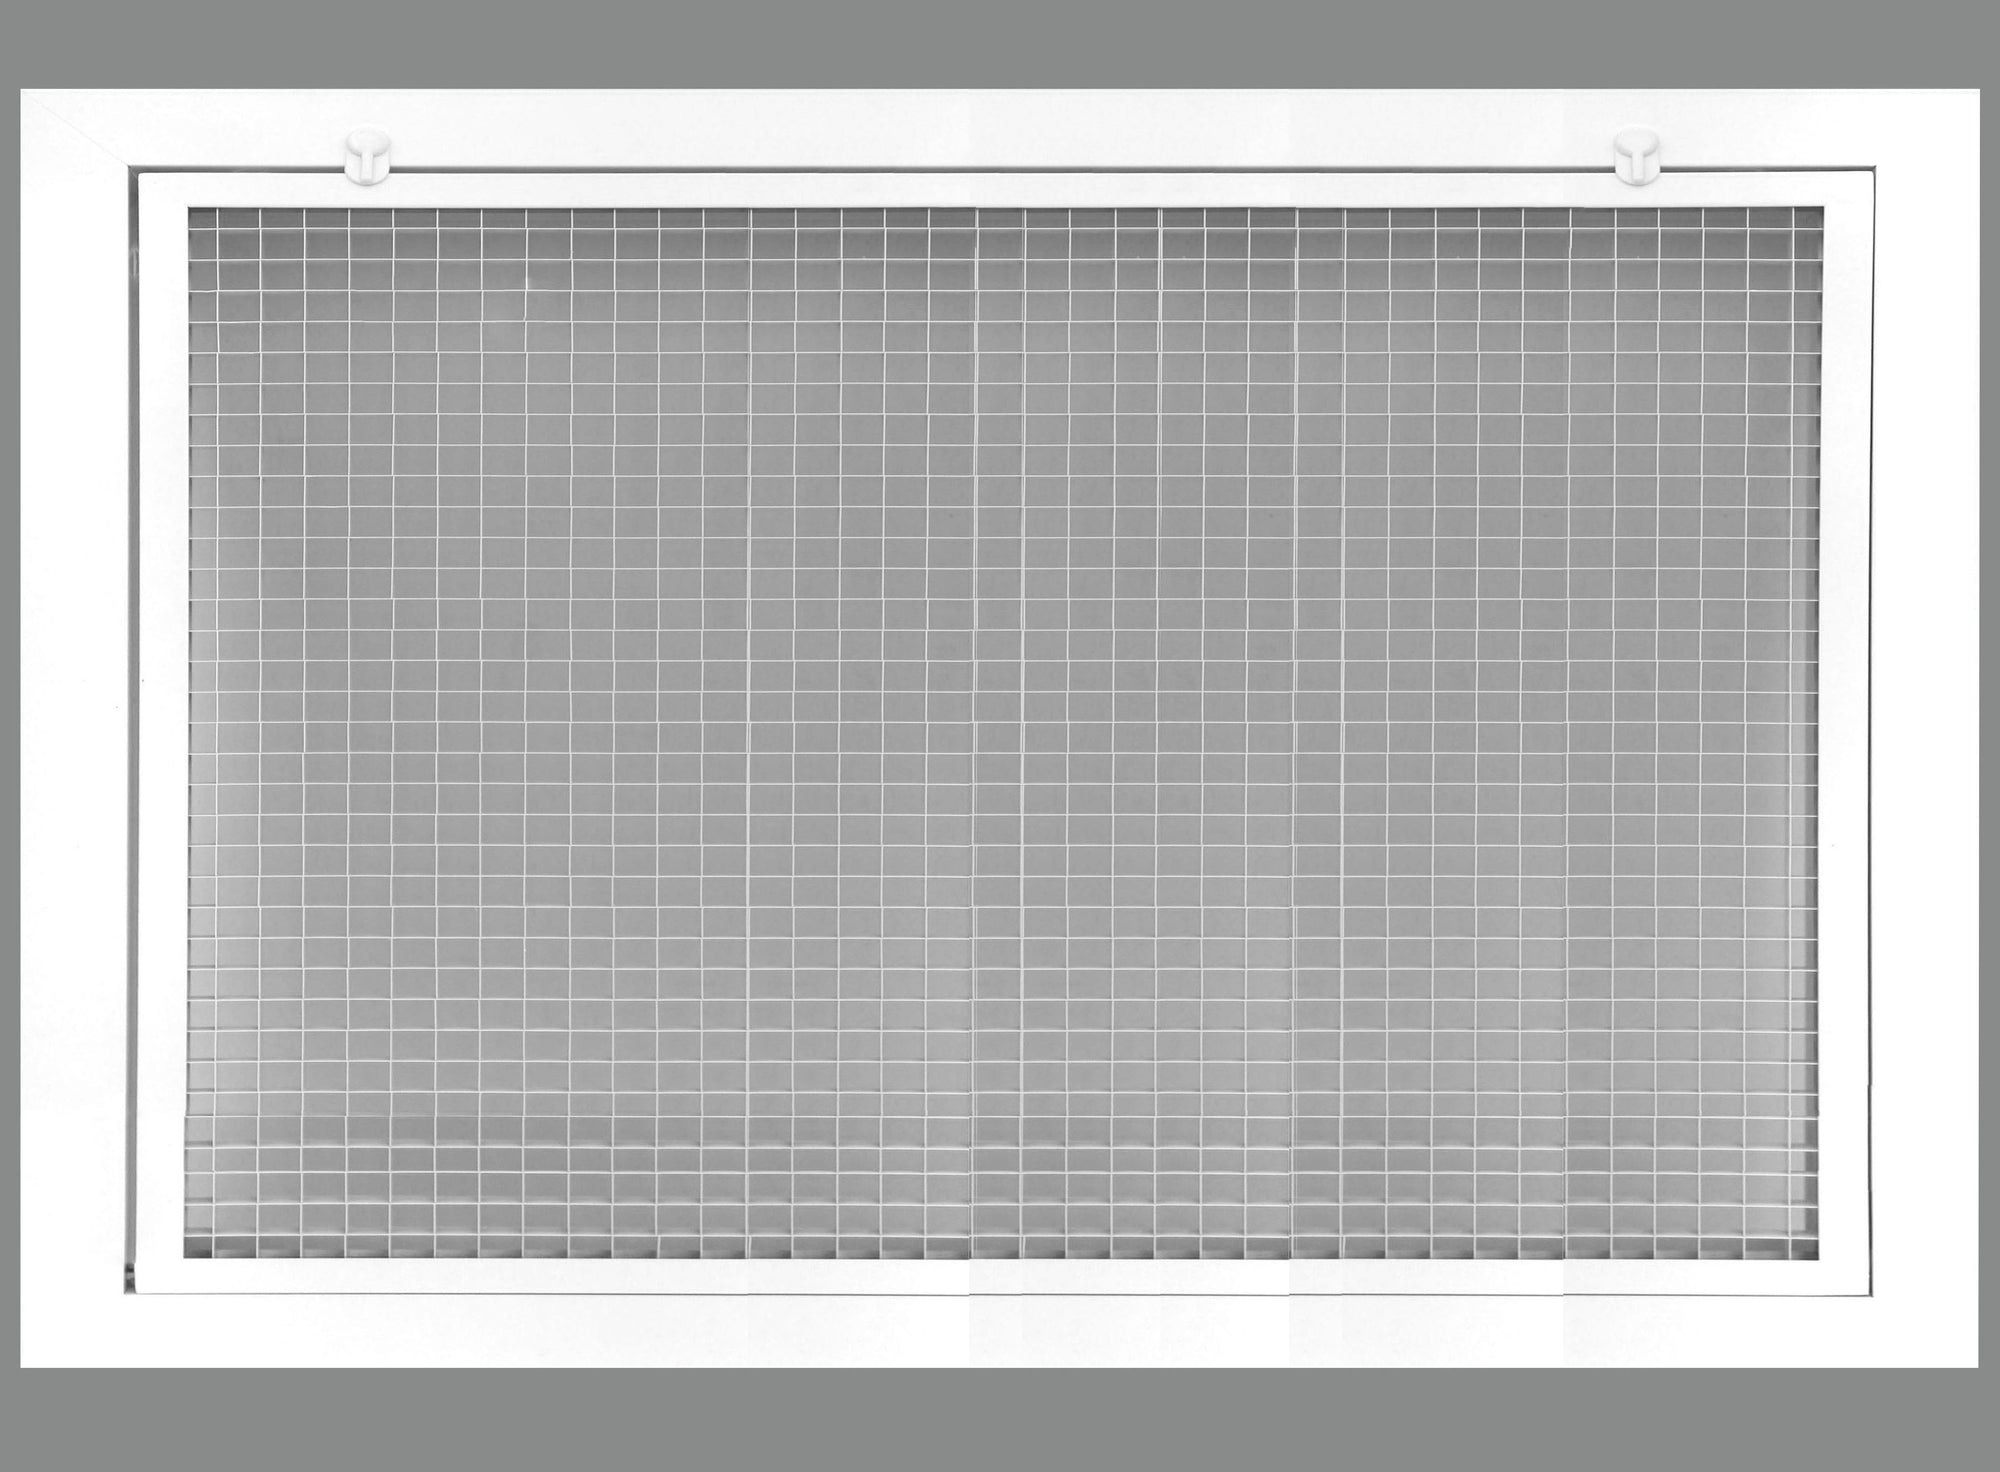 24" x 18" Cube Core Eggcrate Return Air Filter Grille for 1" Filter